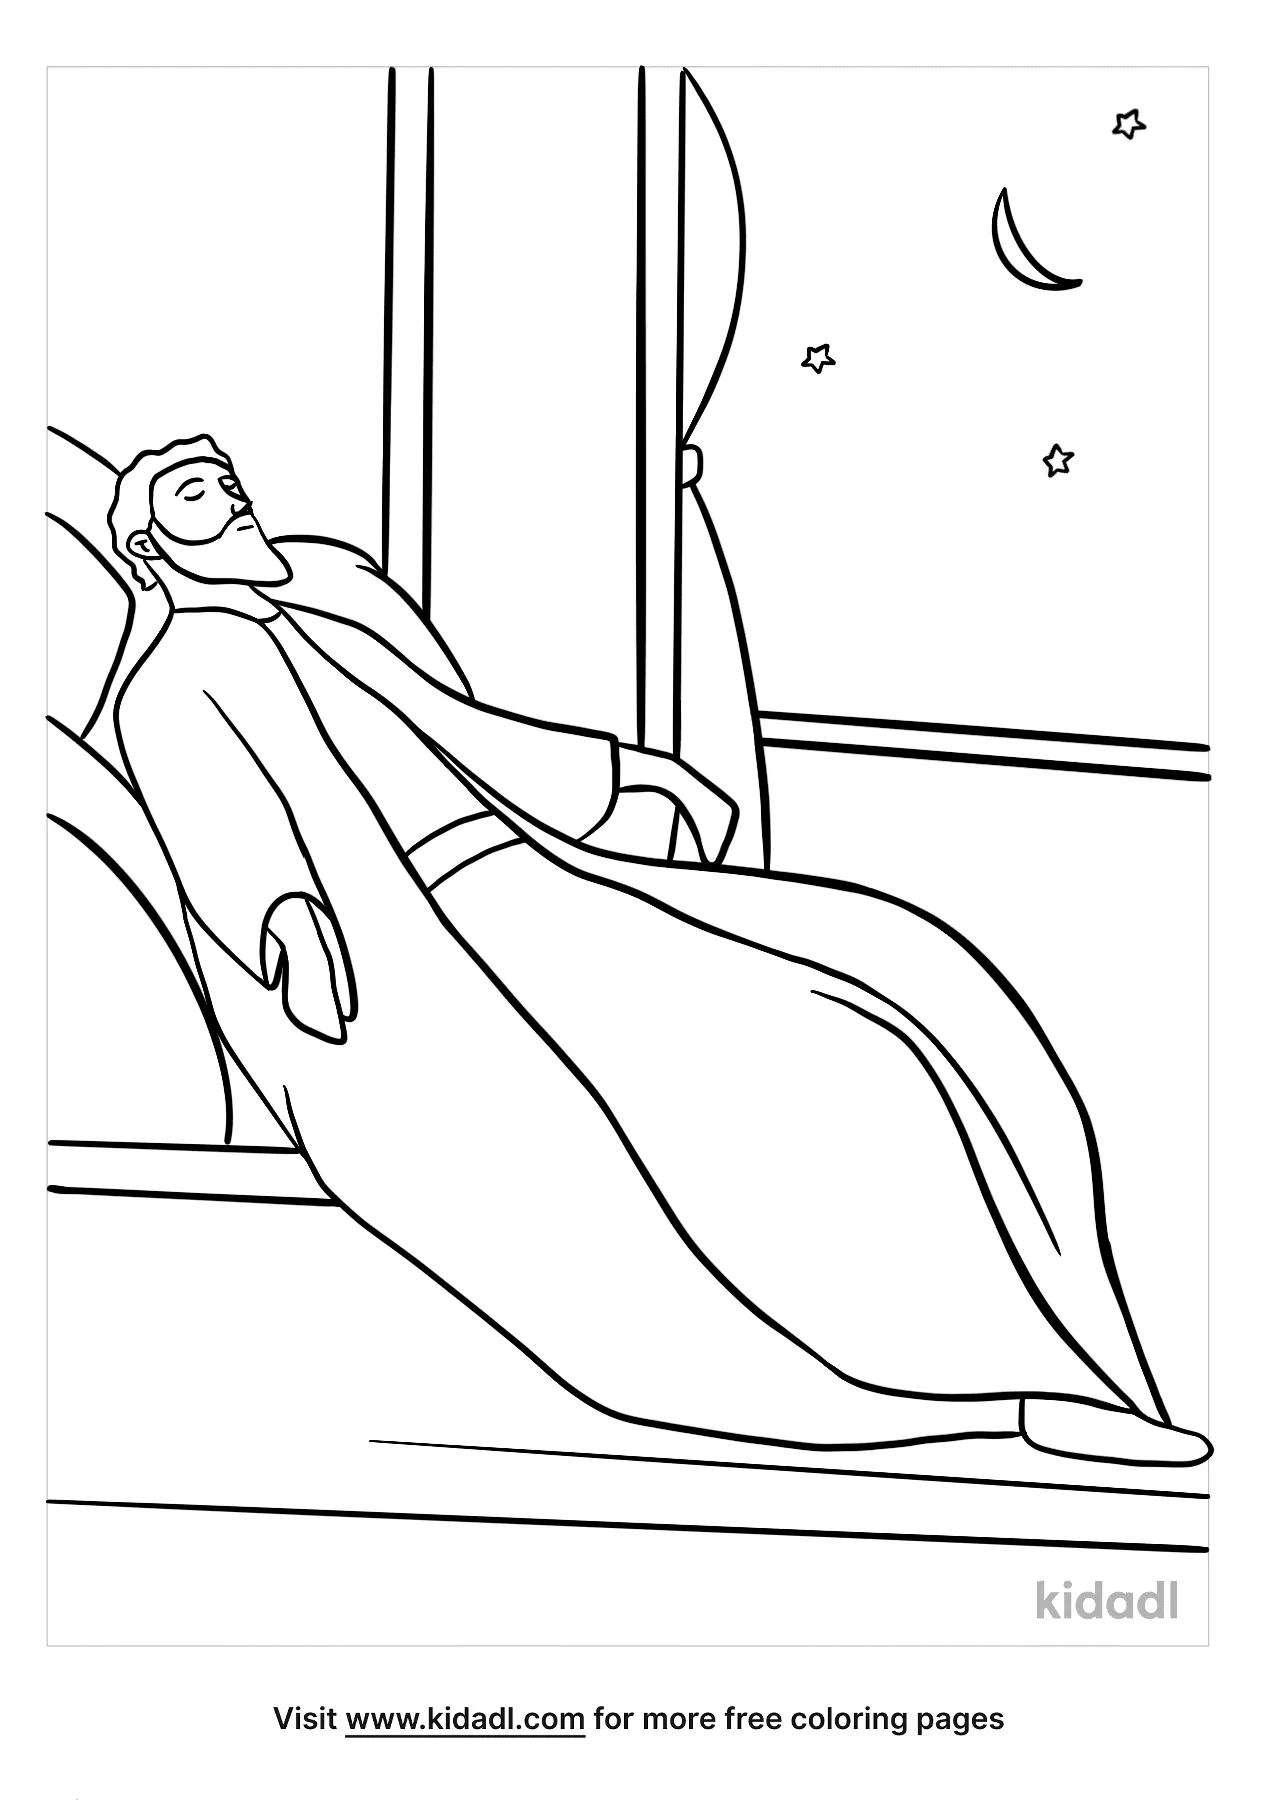 Free solomon asking for wisdom coloring page coloring page printables